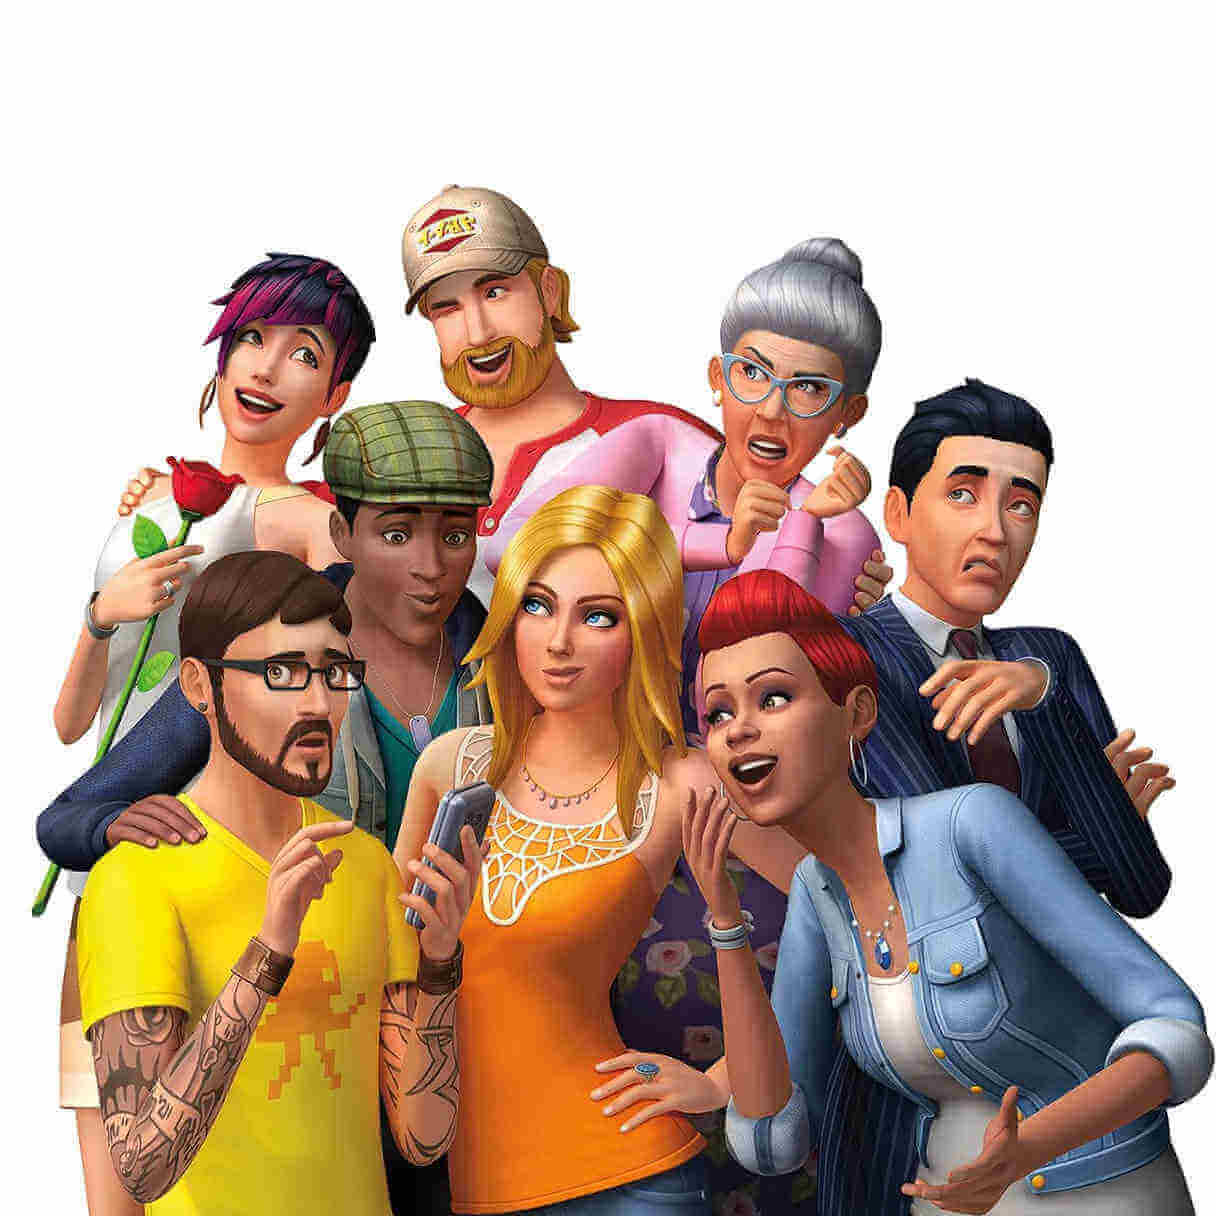 how to Change the game language in The Sims 4